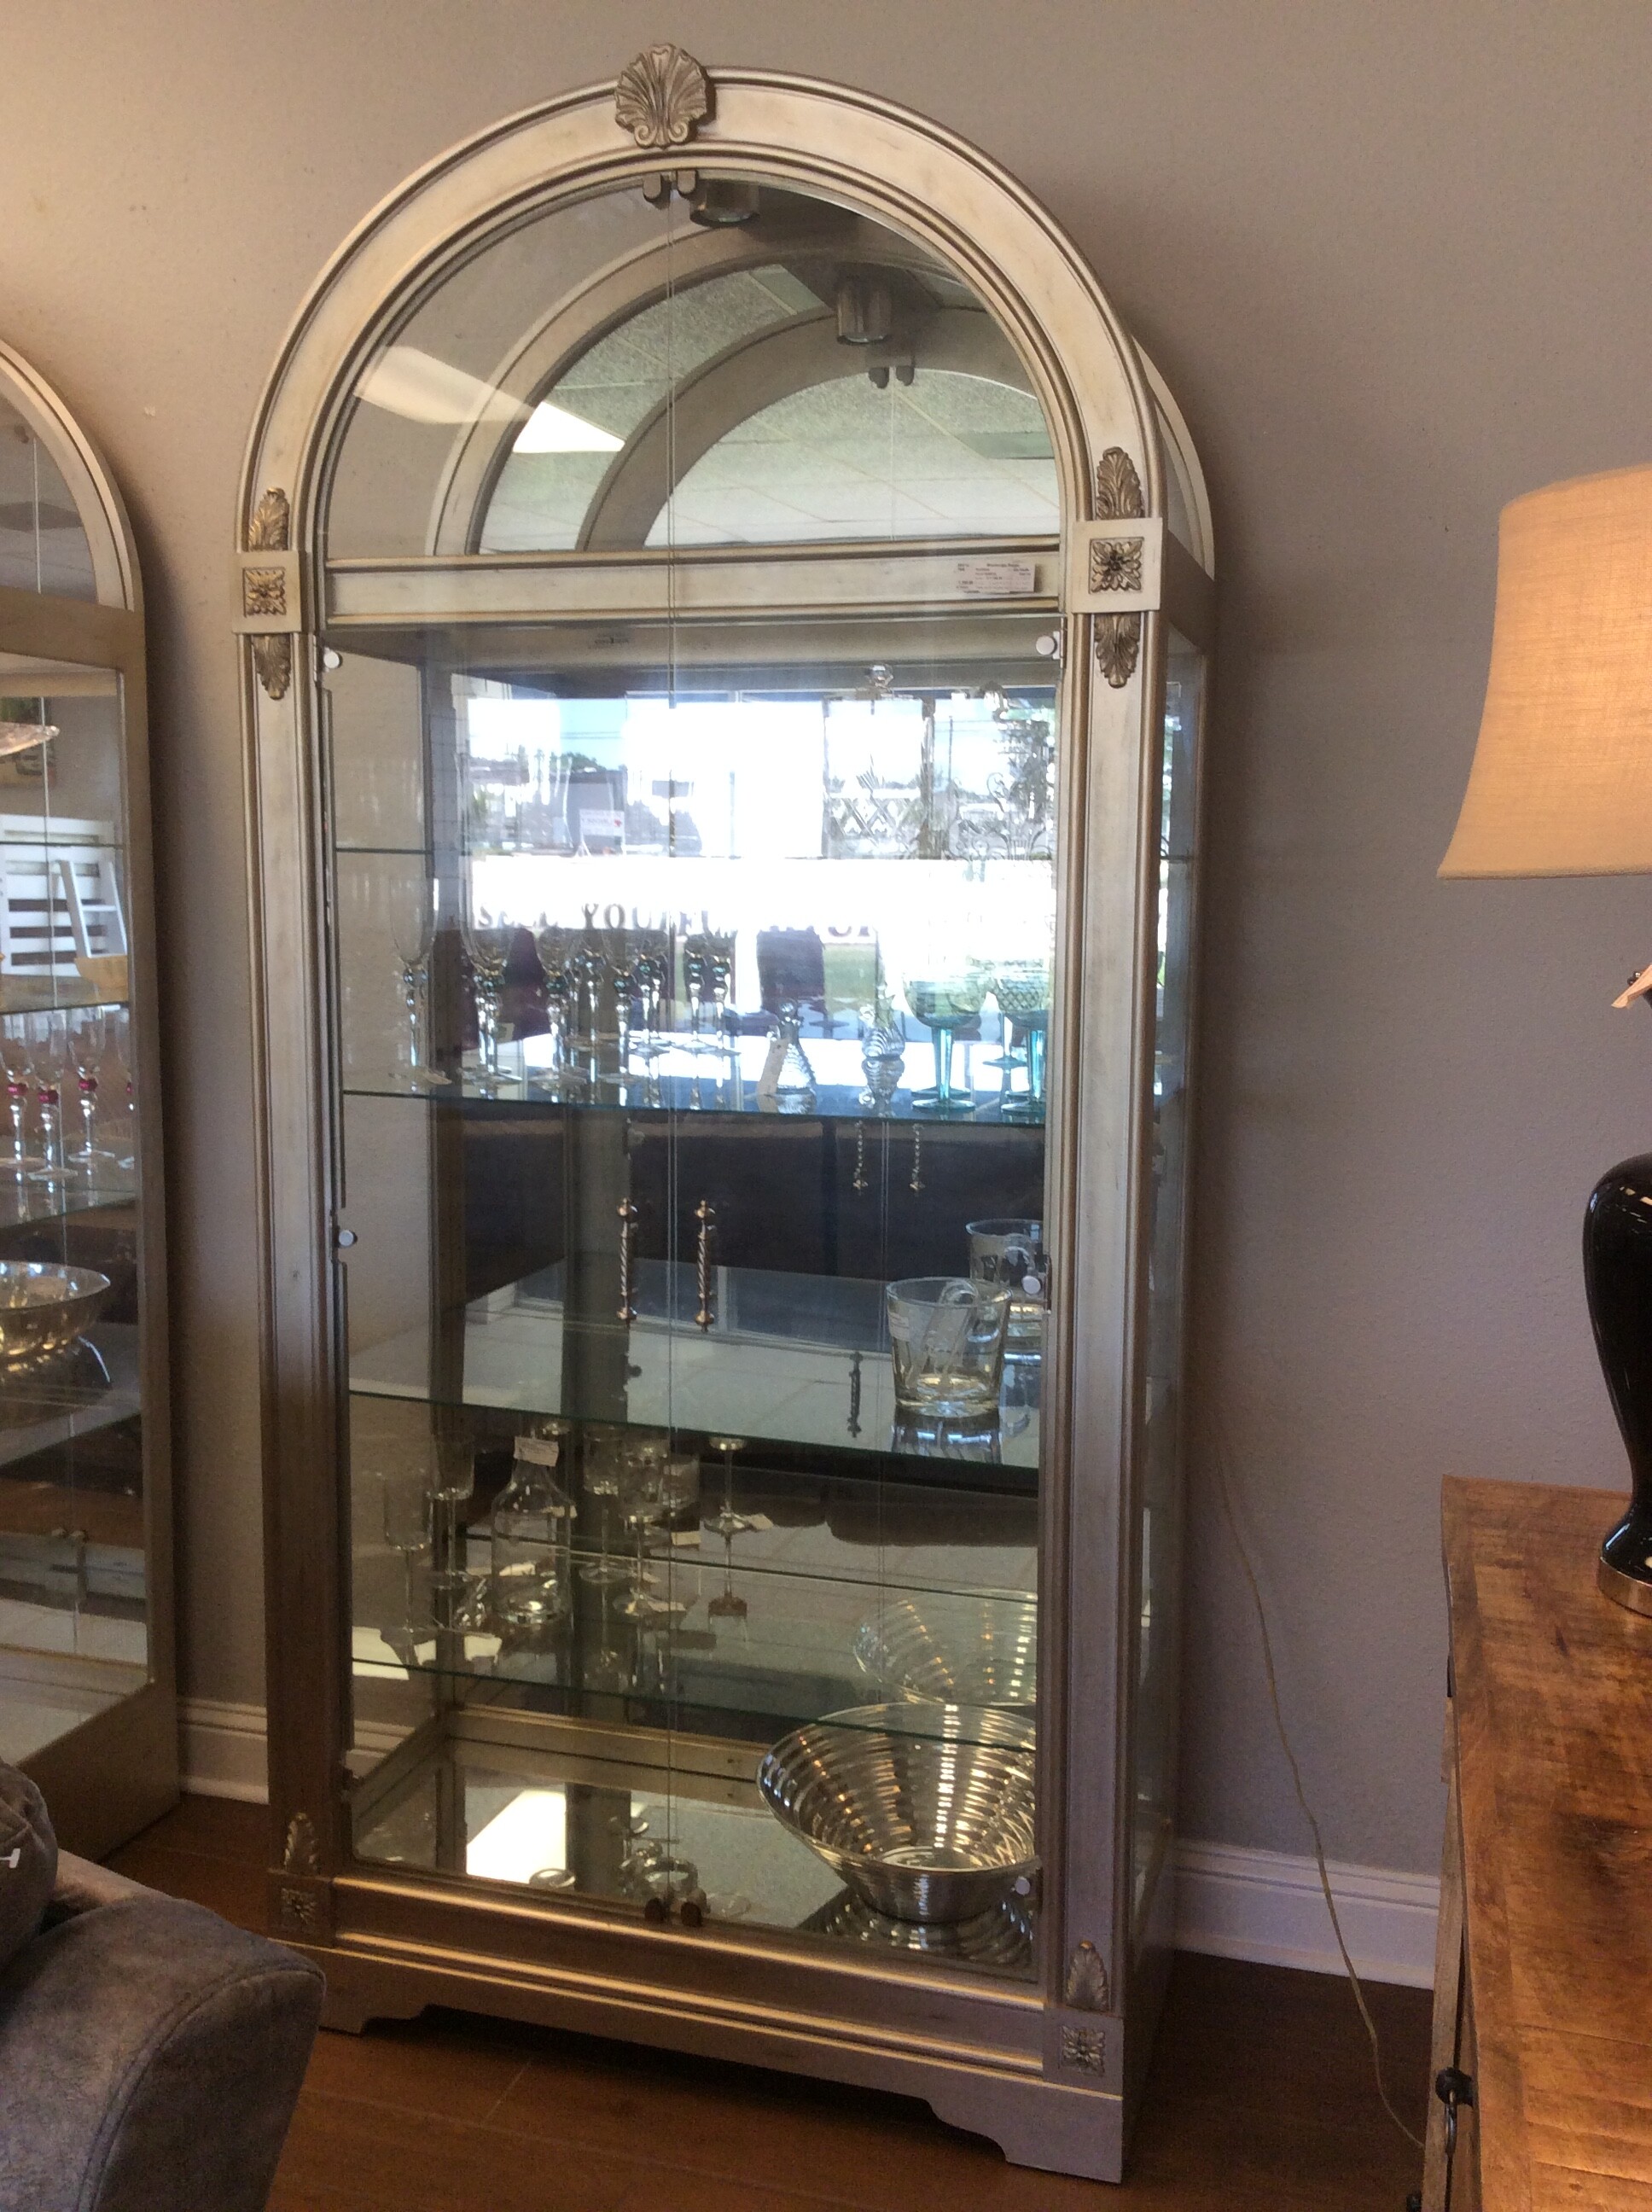 This is a beautiful Howard Millar Silver & Glass Curio Cabinet. This Curio has Double Glass Doors with Silver Handles, Mirrored Back and Bottom, 1 Light and 5 Adjustable Shelfs.